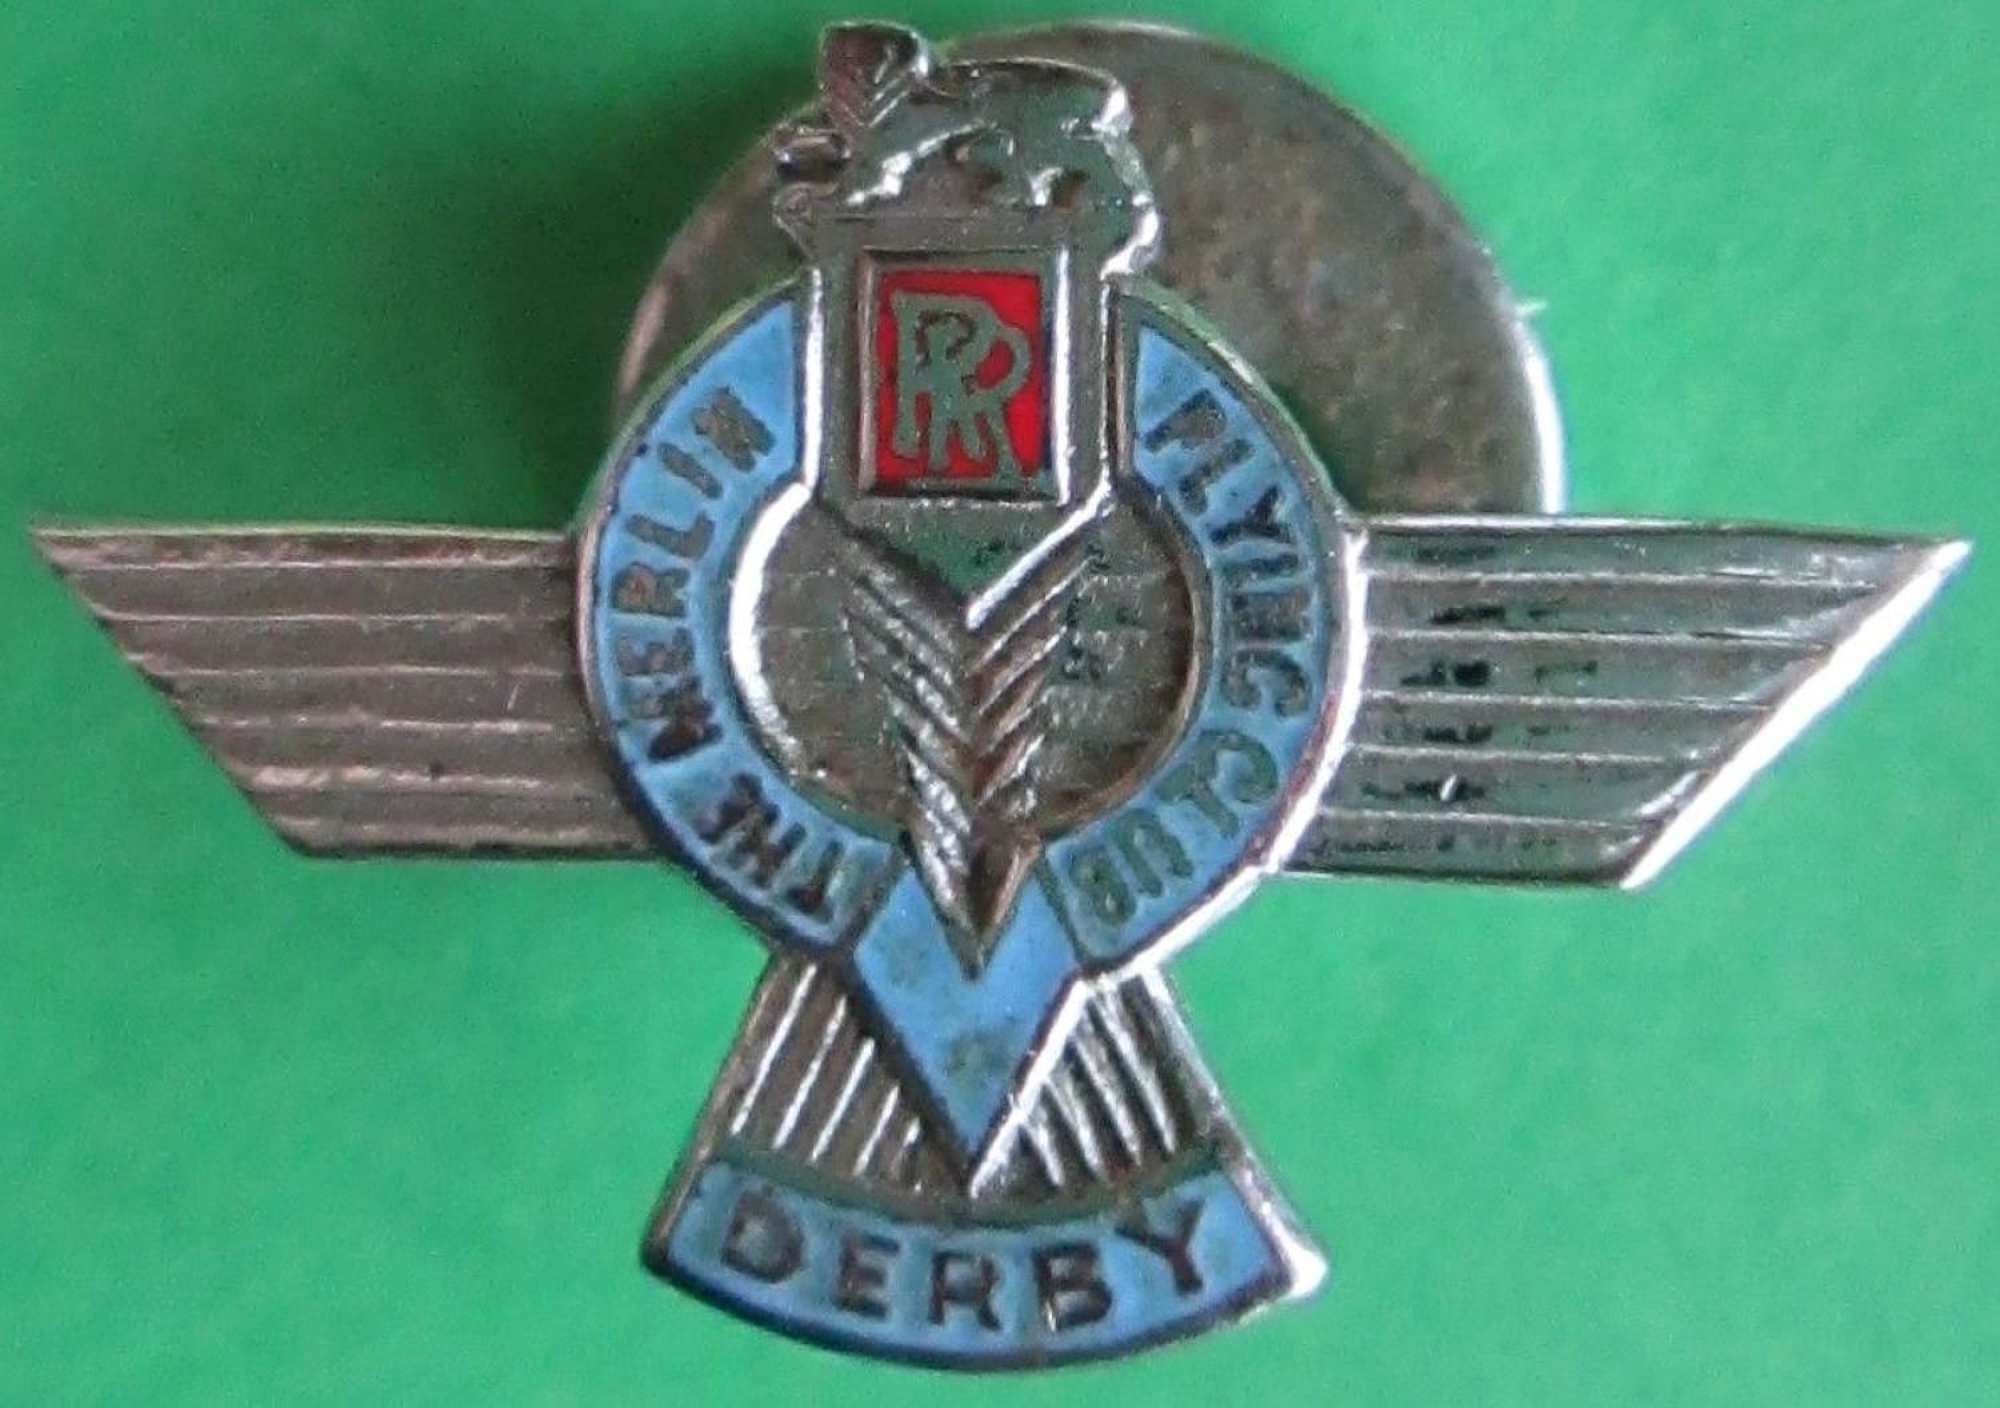 A GOOD EARLY EXAMPLE OF THE MERLIN FLYING CLUB BADGE